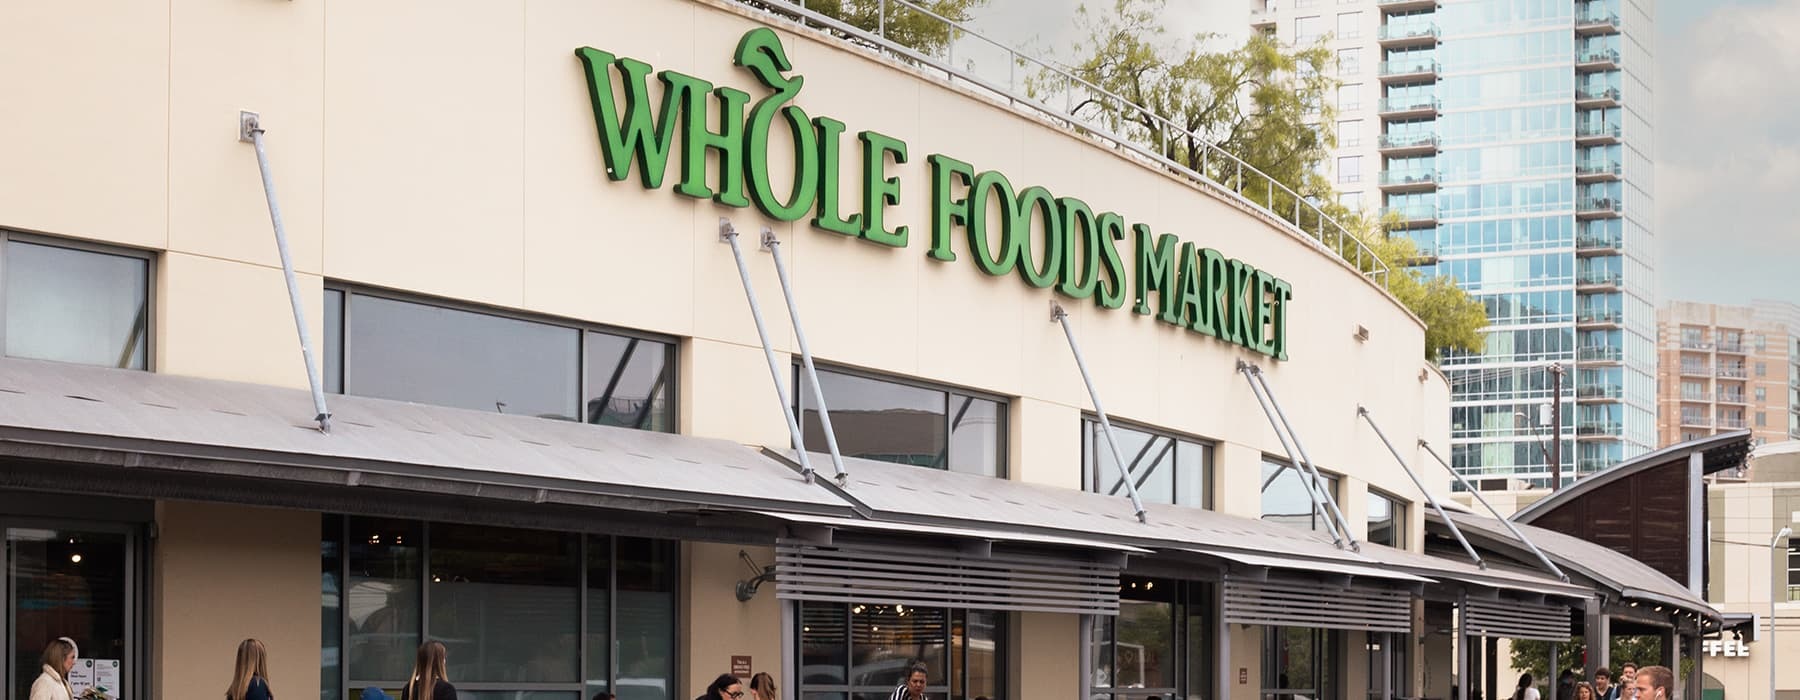 lifestyle image of a Whole Foods storeftont